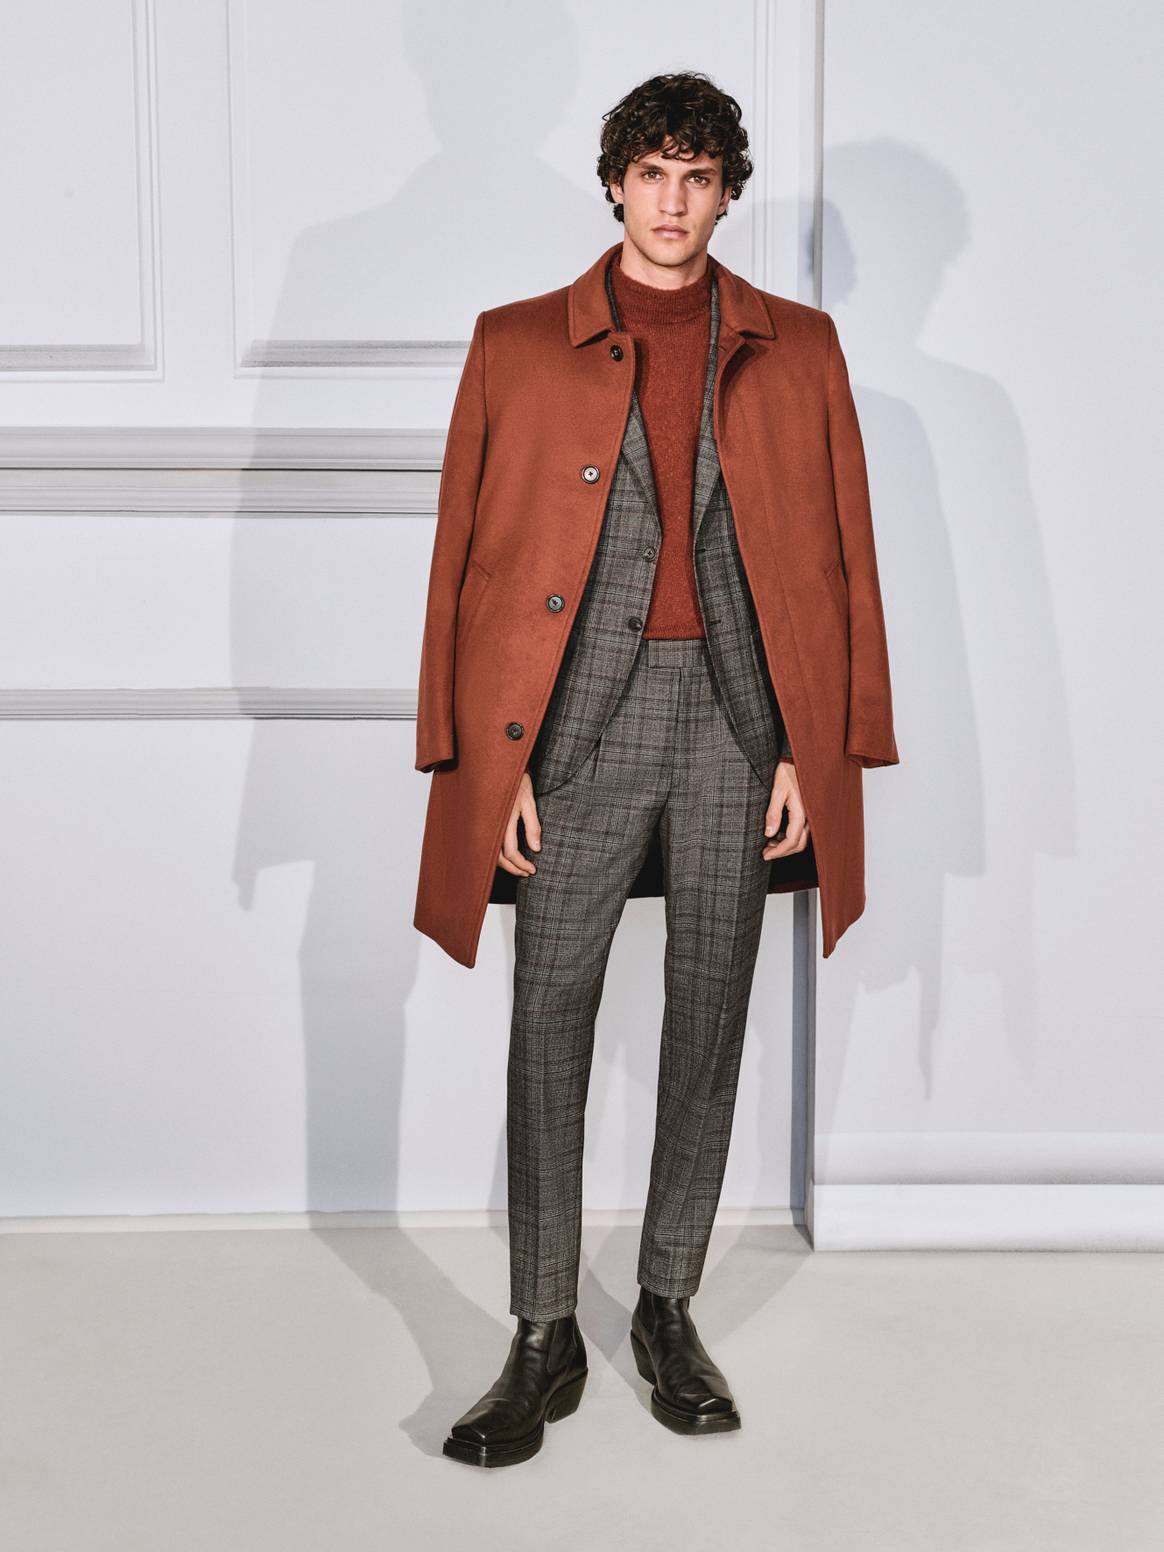 Picture: JOOP!, Men FW23 Collection, courtesy of the brand